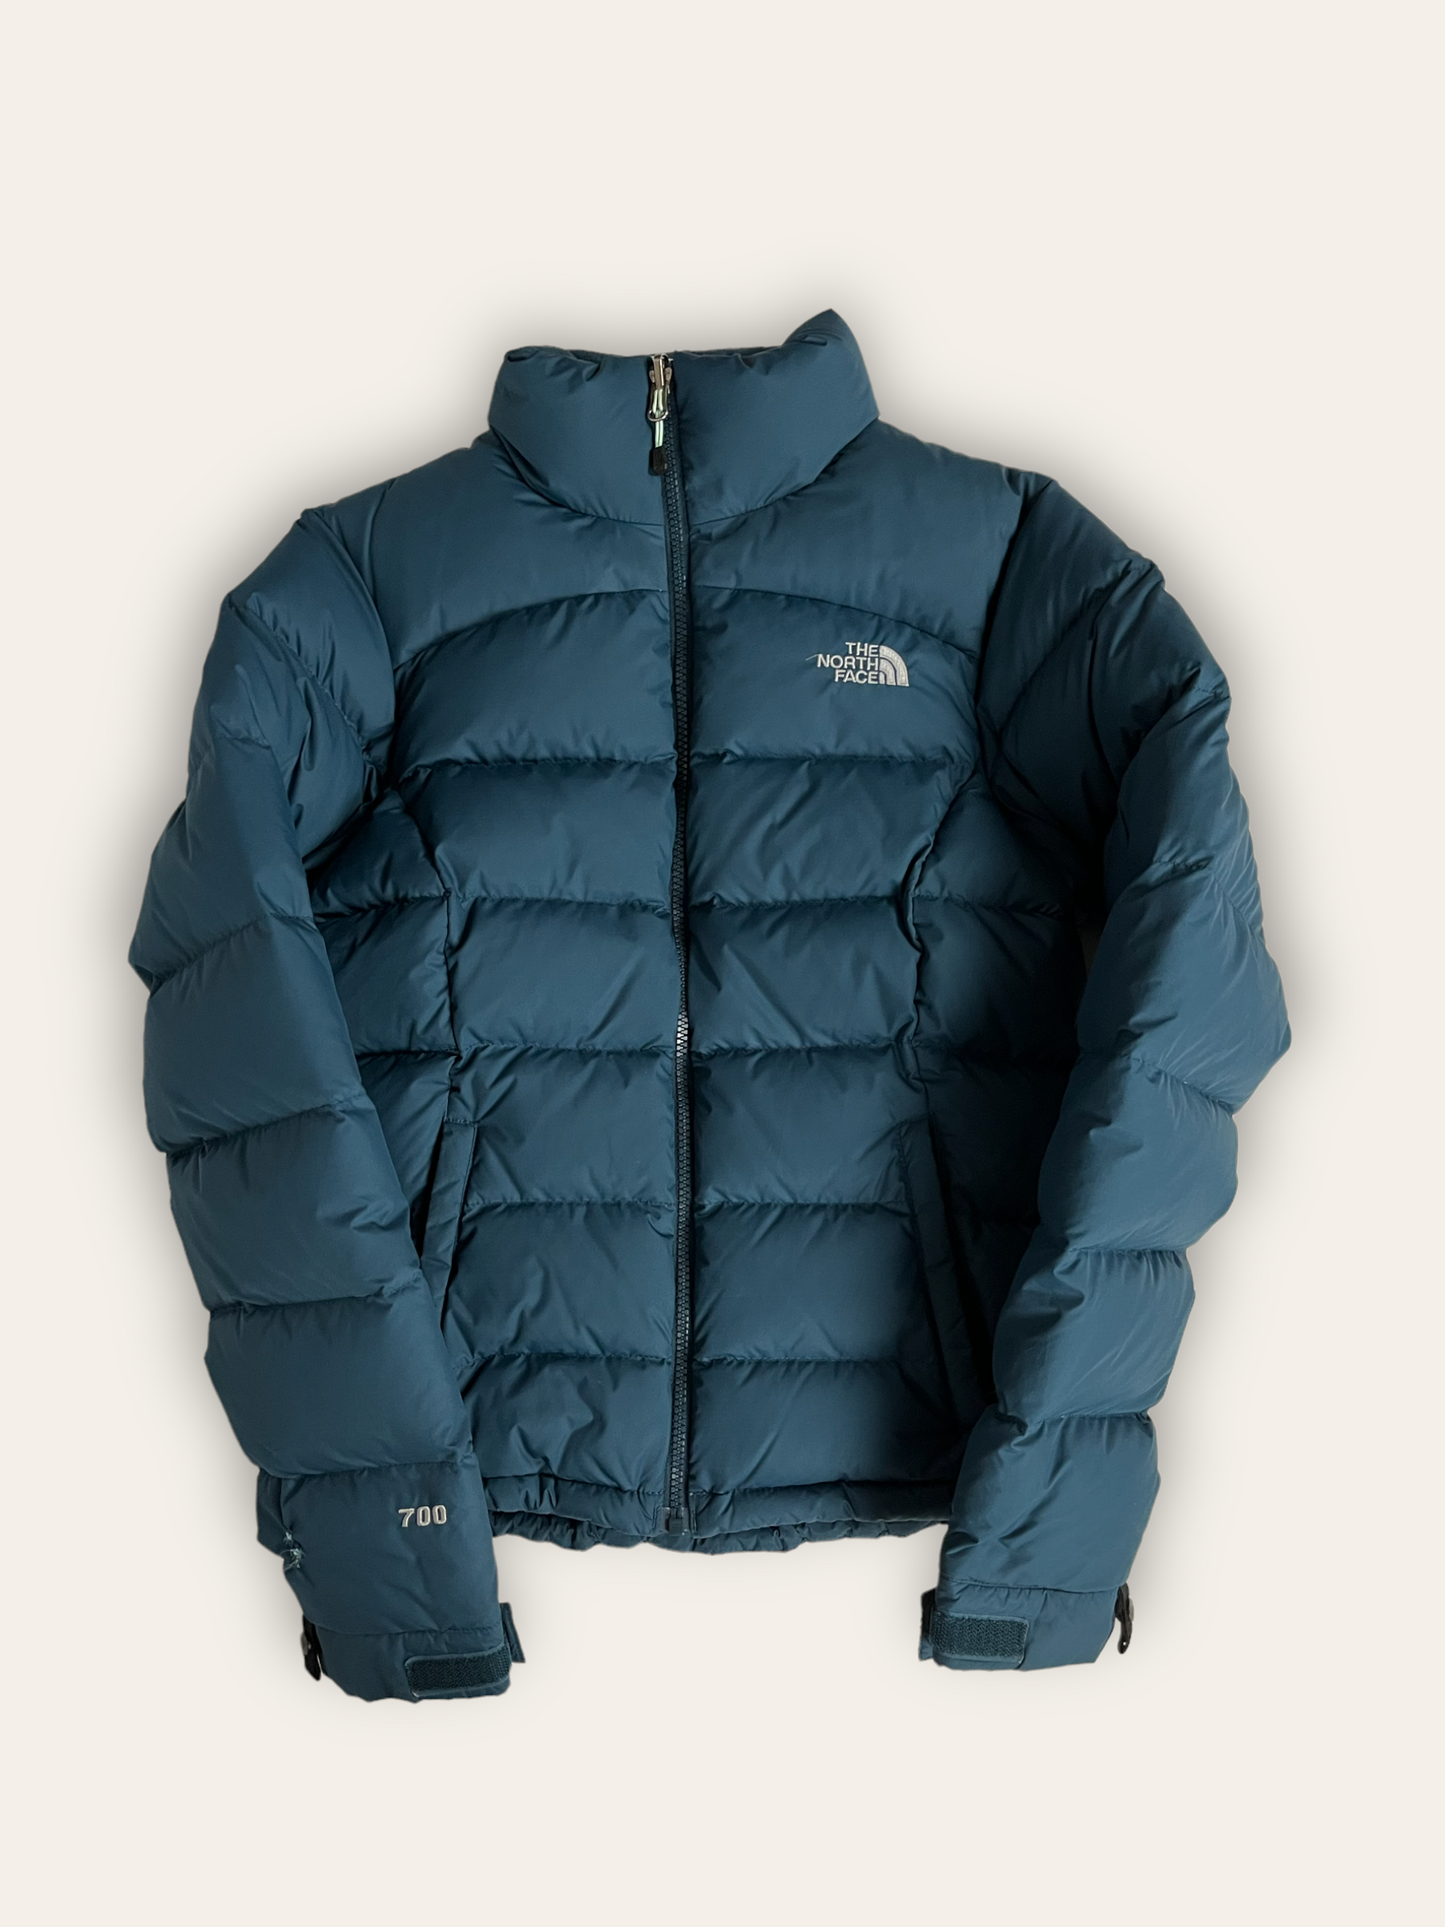 Vintage North Face Teal 700 Puffer